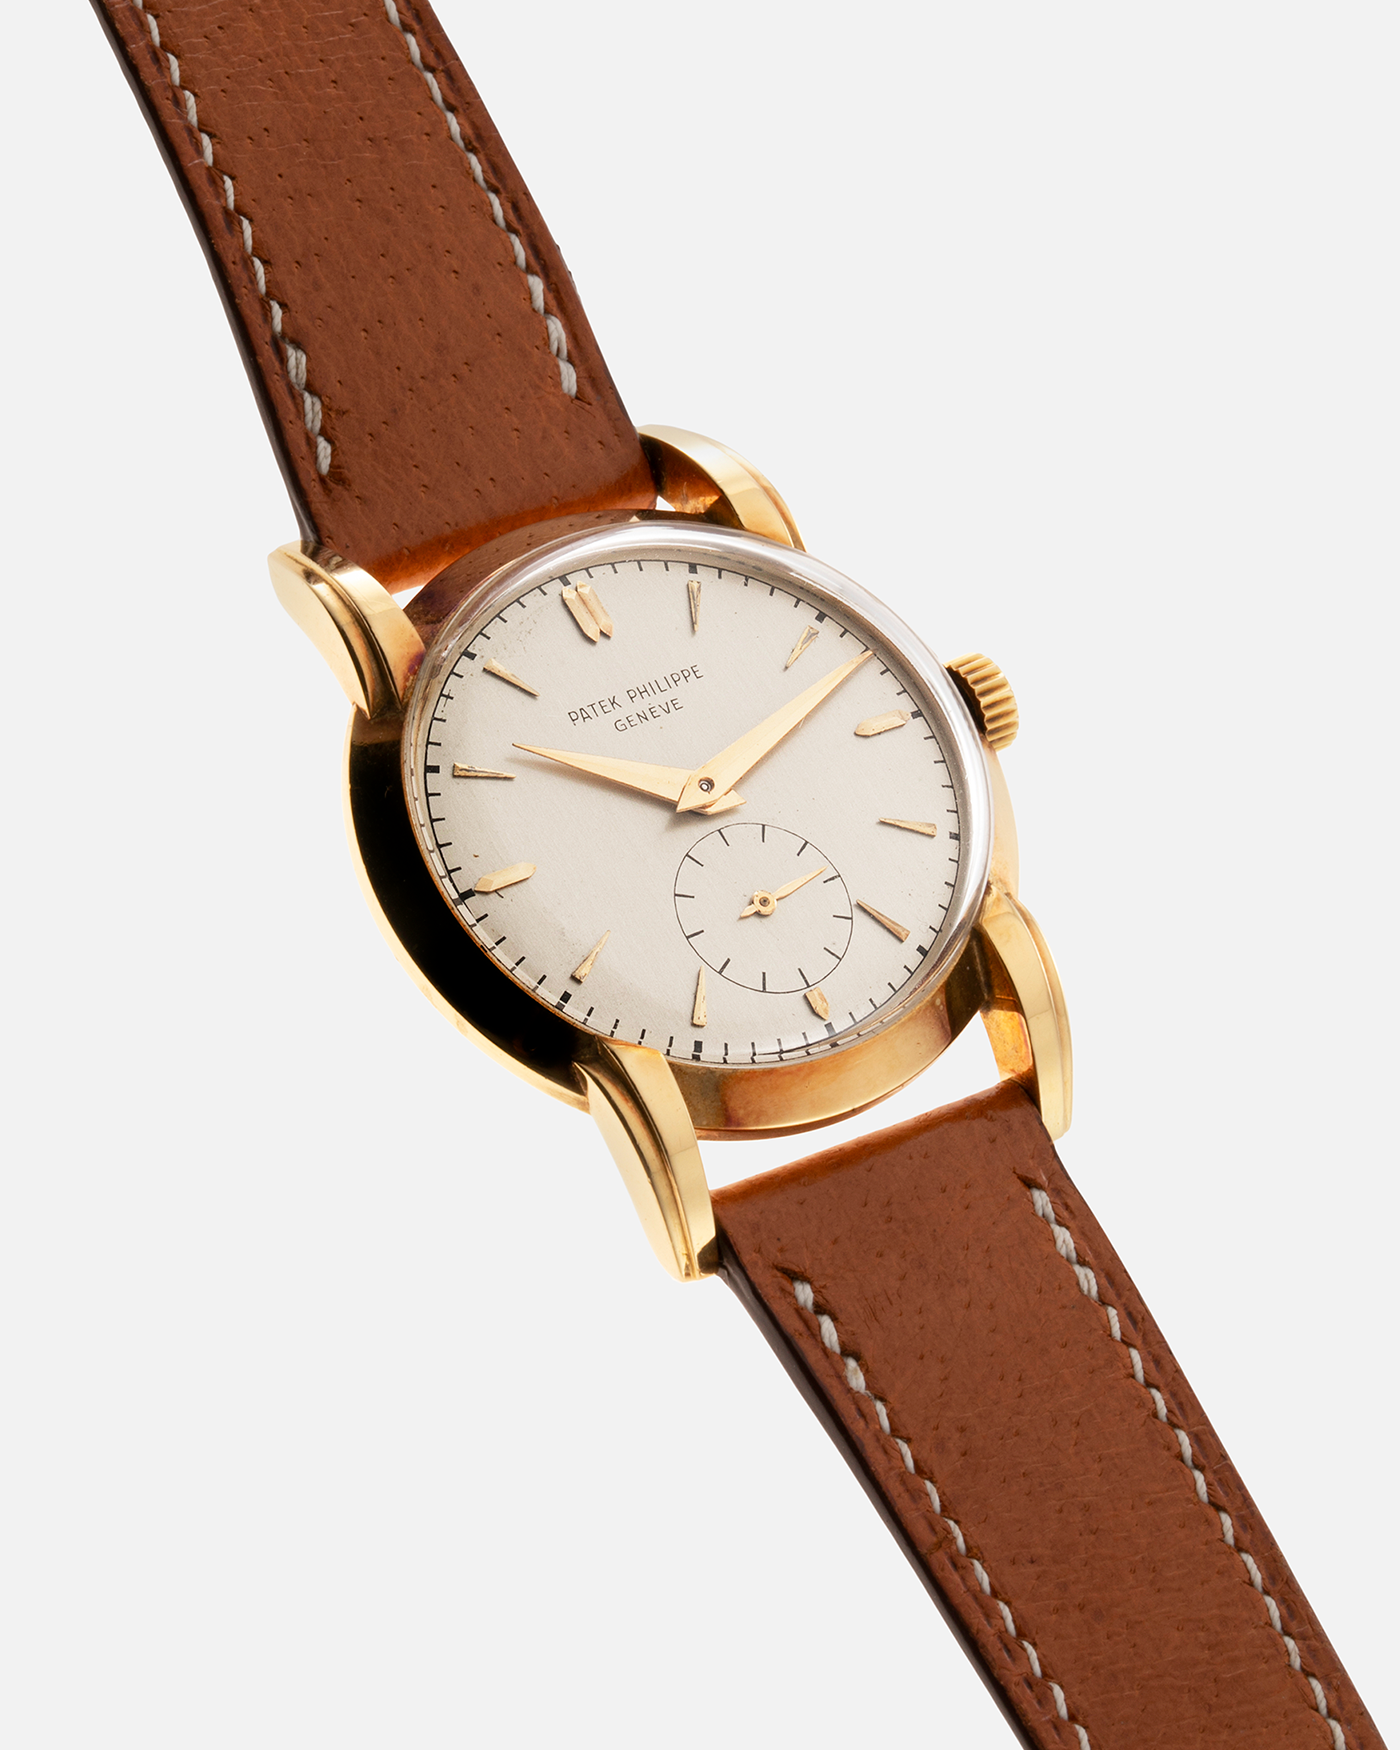 Brand: Patek Philippe Year: 1940 - 1950s Reference Number: 2429 Material: 18-carat Yellow Gold Movement: Cal. 10-200, Manual-Winding Case Diameter: 33mm Bracelet/Strap: Light Brown Nostime Calf Strap with 18k Patek Philippe 18-carat Yellow Gold Tang Buckle